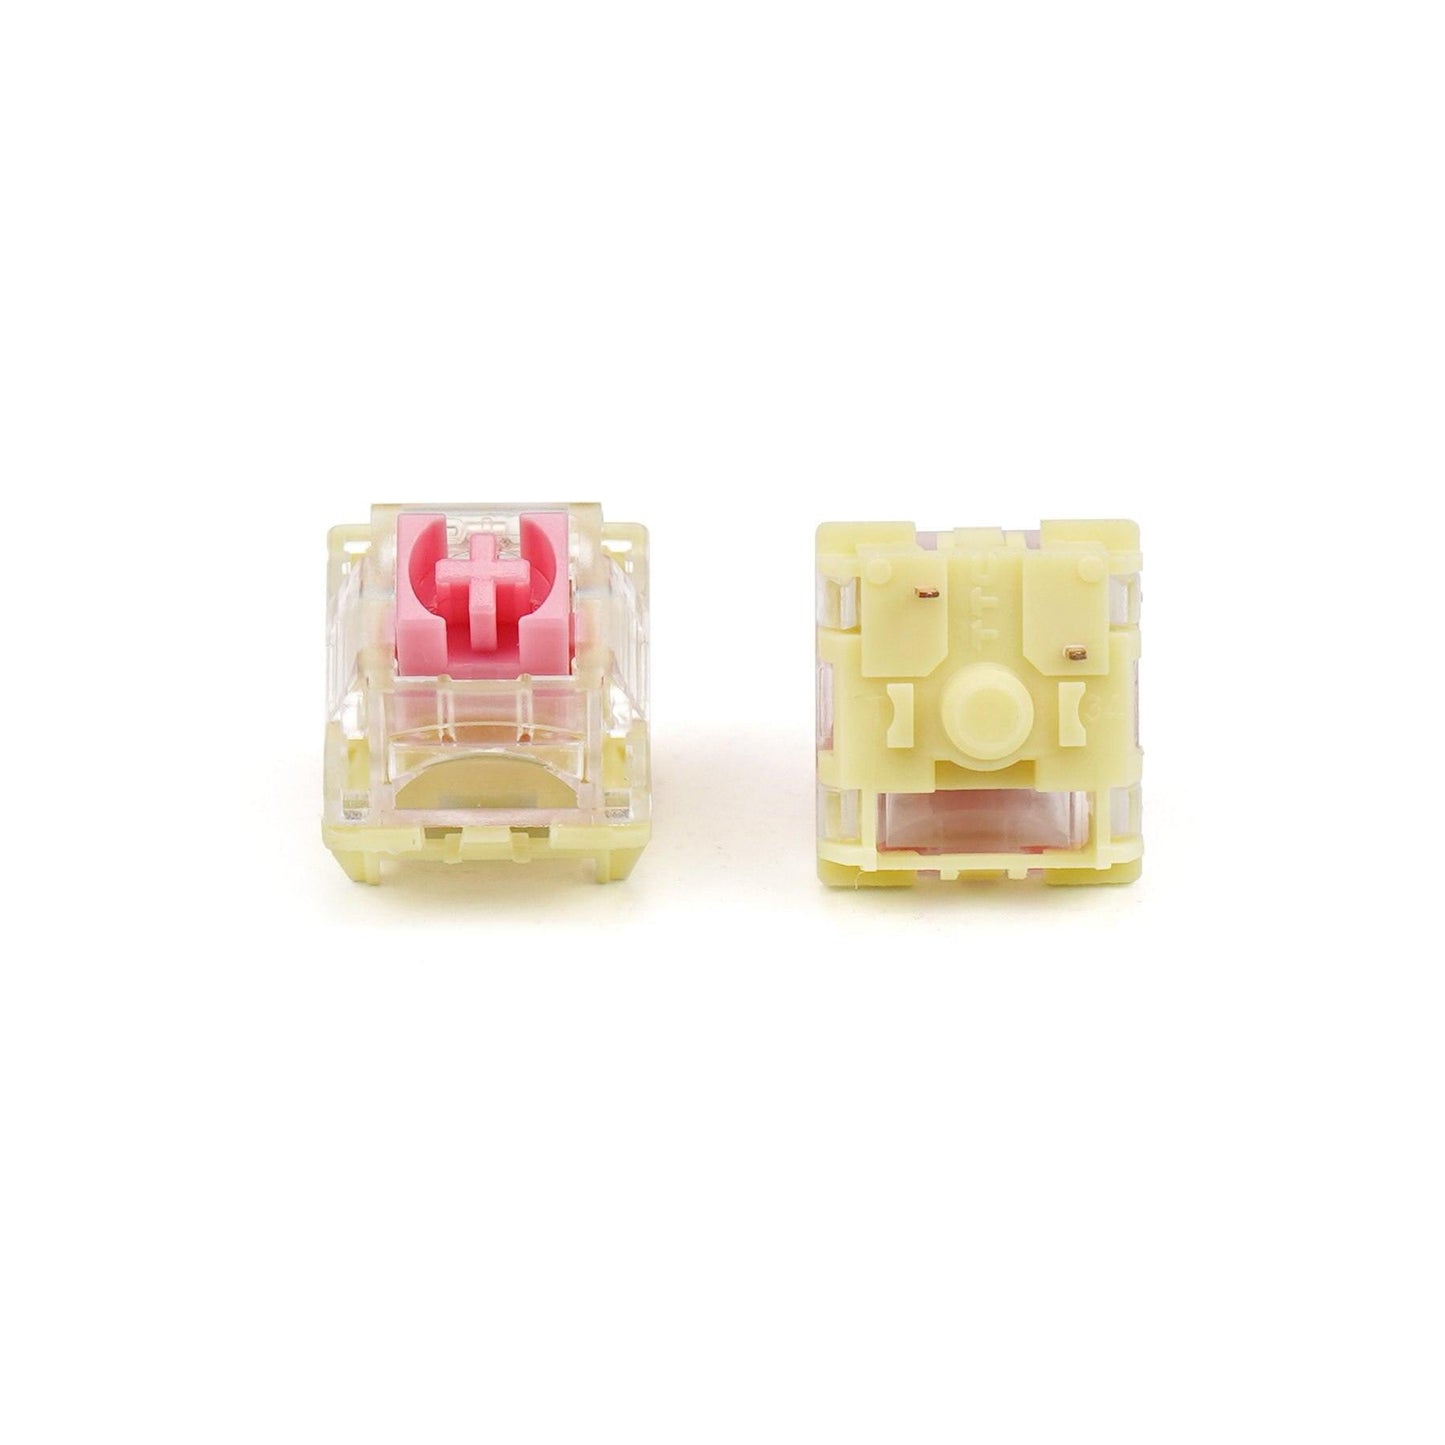 TTC GOLD PINK LINEAR SWITCHES - THE KEYCAP CLUB